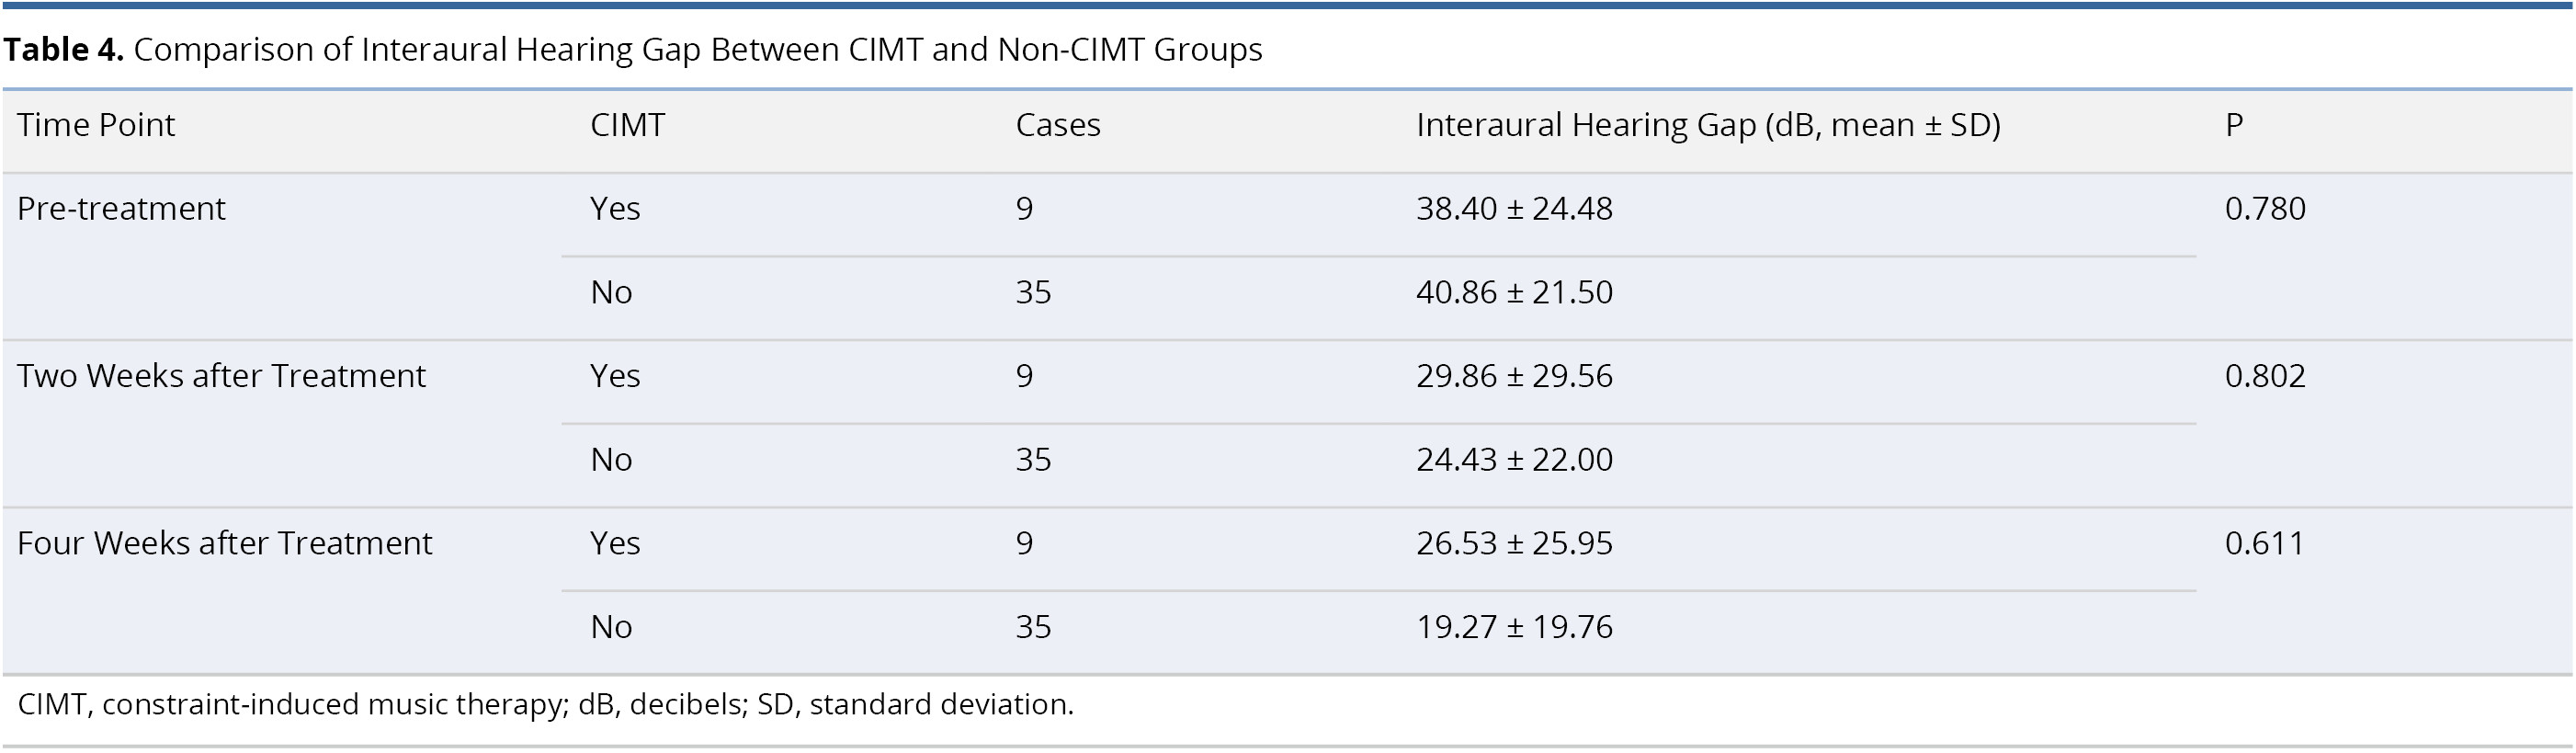 Table 4.jpgComparison of Interaural Hearing Gap Between CIMT and Non-CIMT Groups